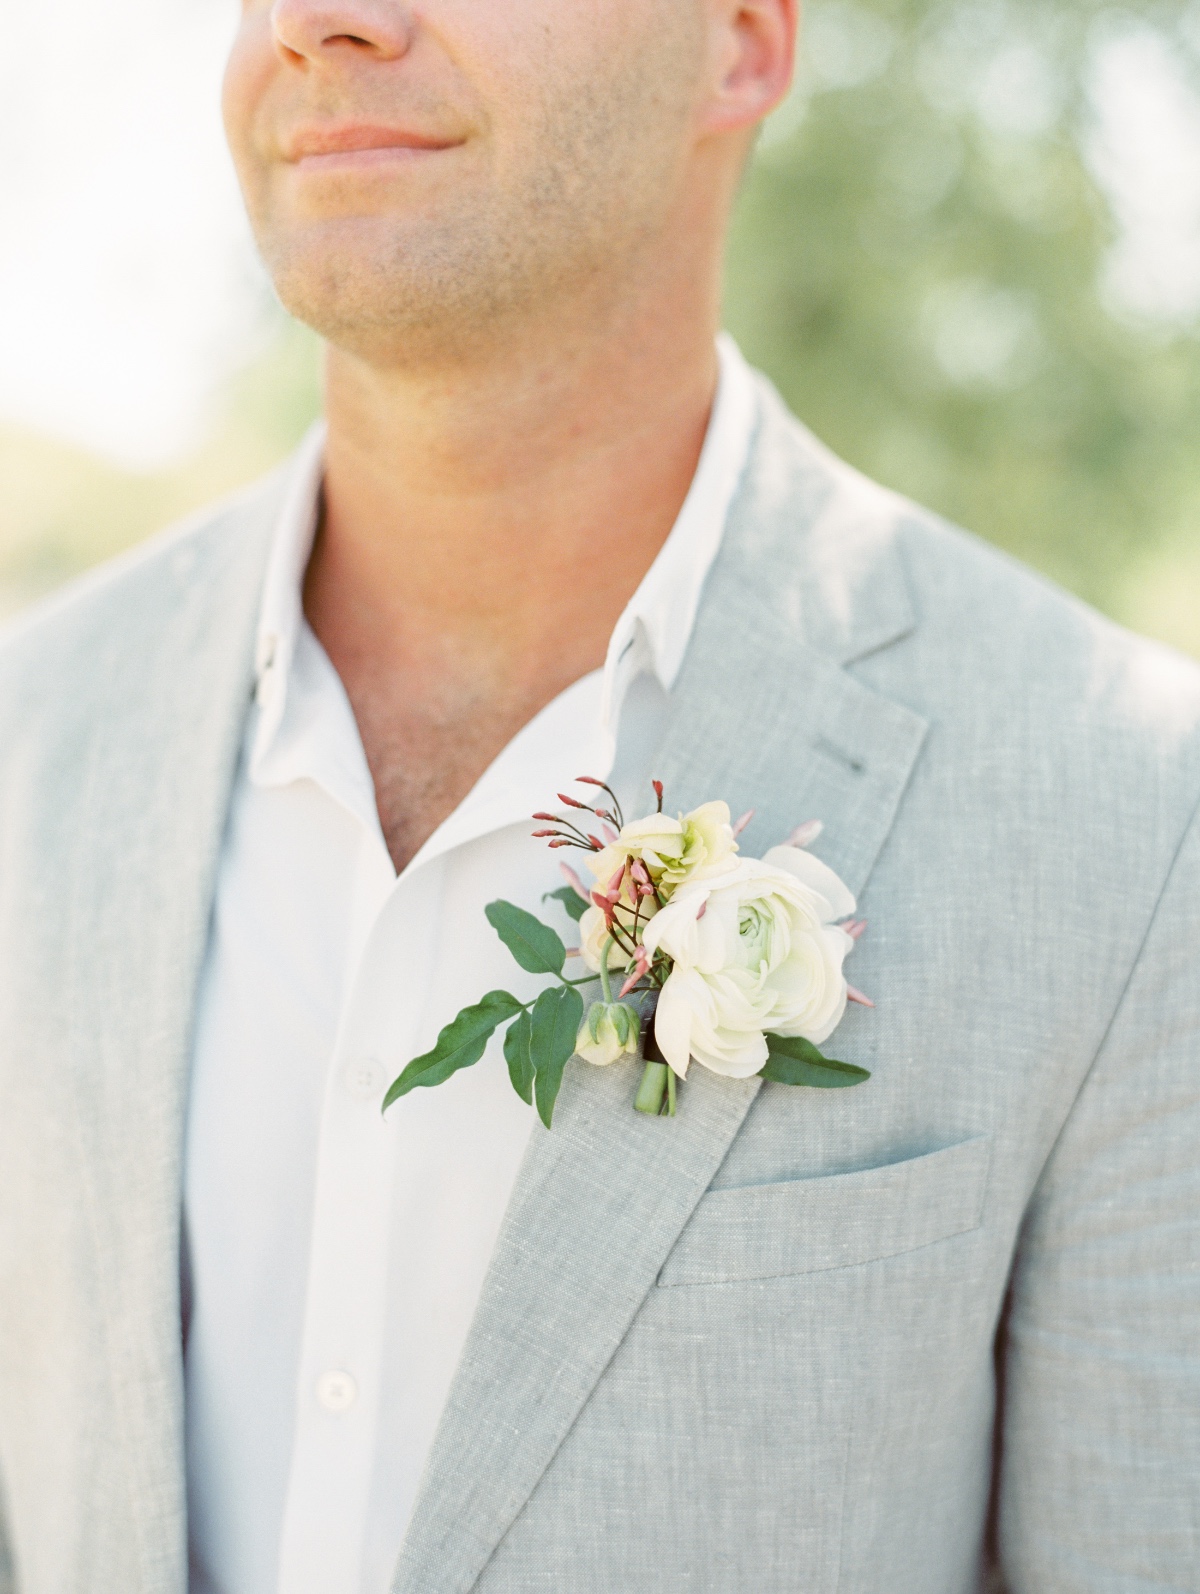 Grey suit groom with pastel white boutonniere 